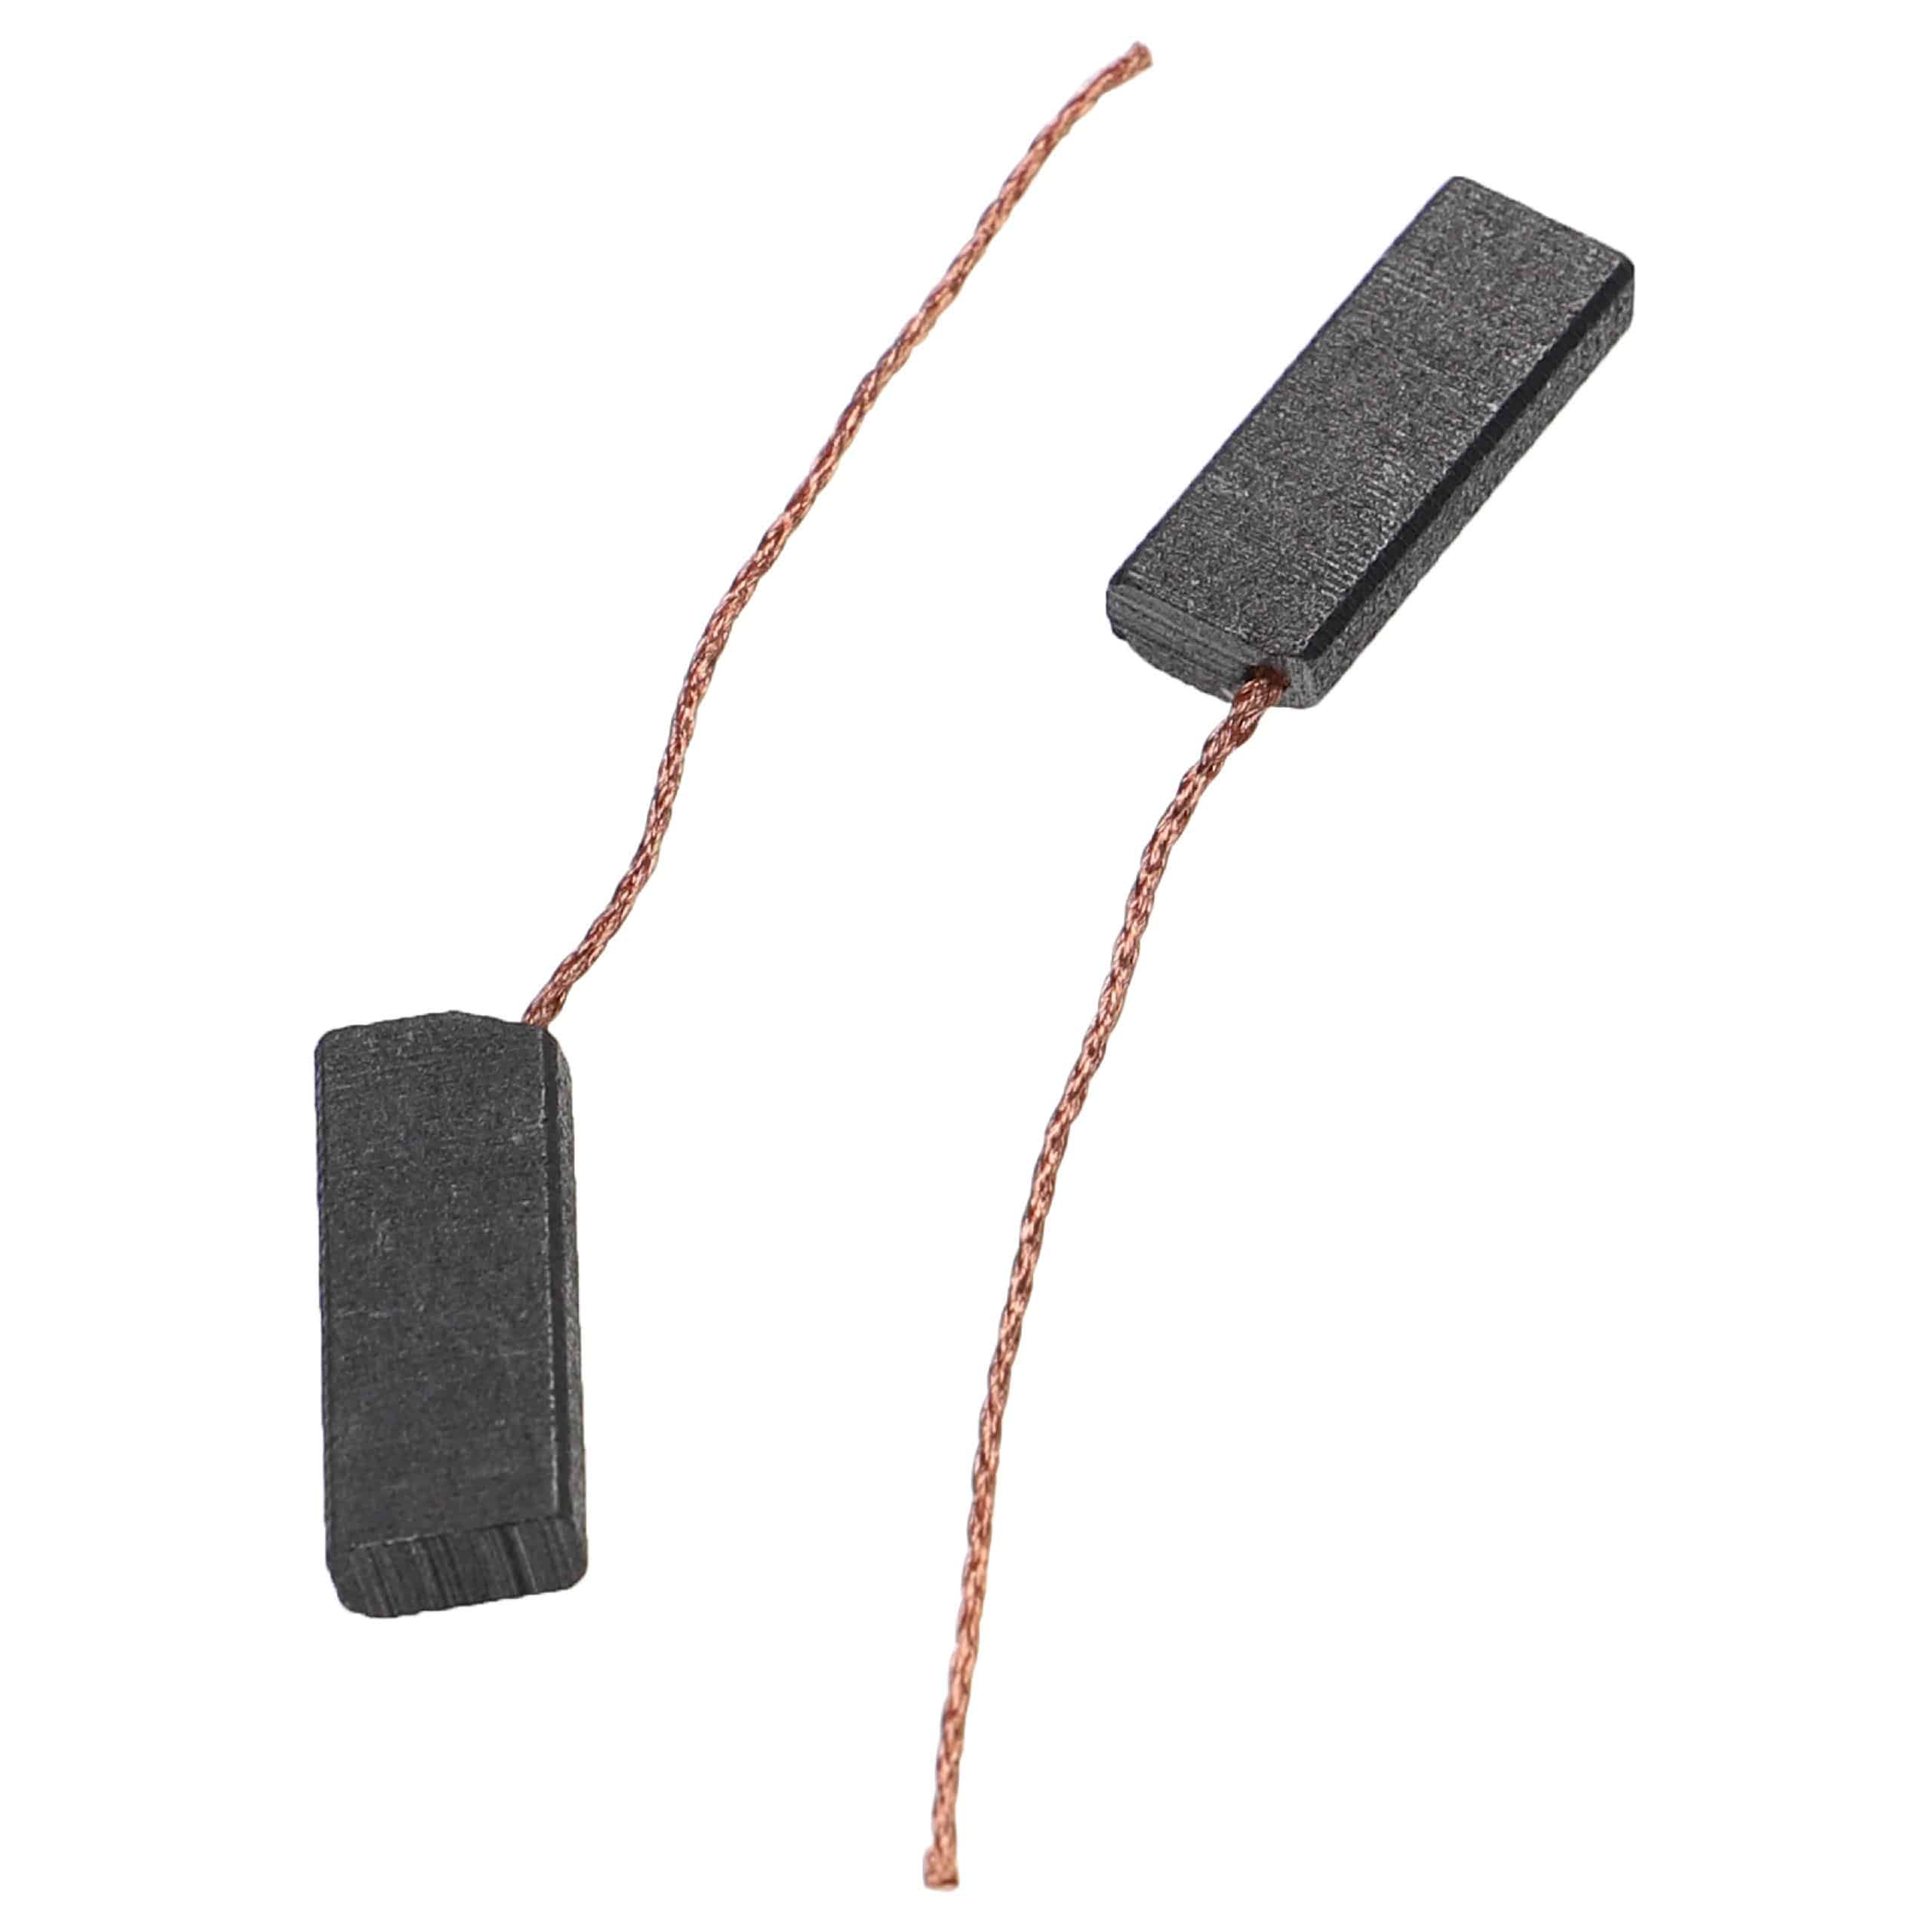 2x Carbon Brush as Replacement for 021521 Electric Power Tools, 5 x 12.4 x 32mm